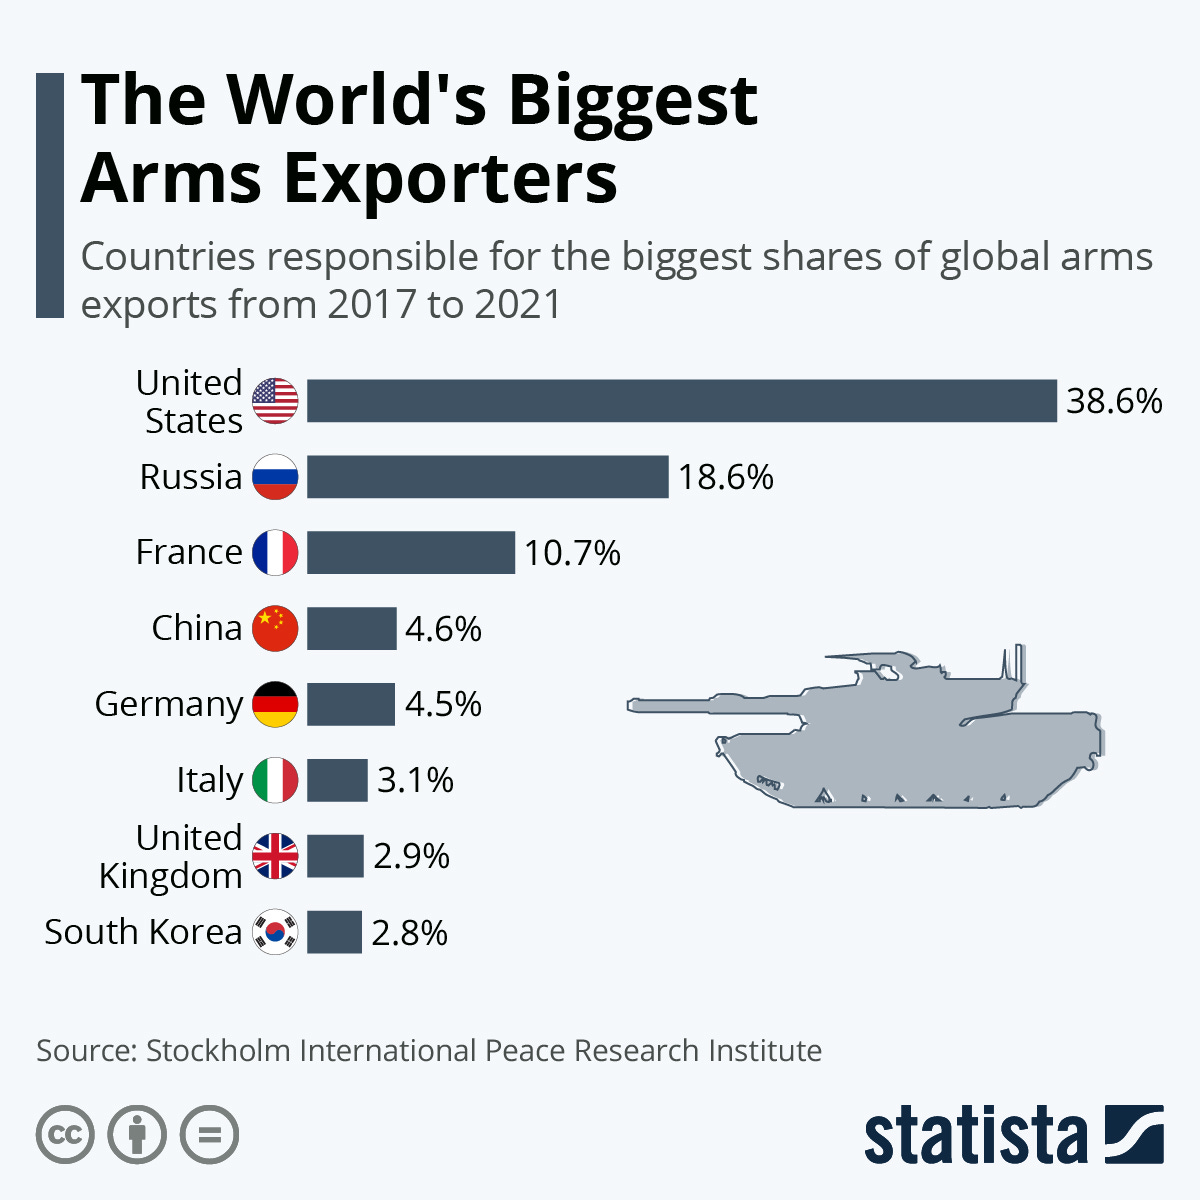 Graphic of world's largest arme exporters. U.S. 38.6%, Russia 18.6%, France 10.7%, China 4.6%, Germany 4.5%, Italy 3.1%, UK 2.9%, South Korea 2.8%